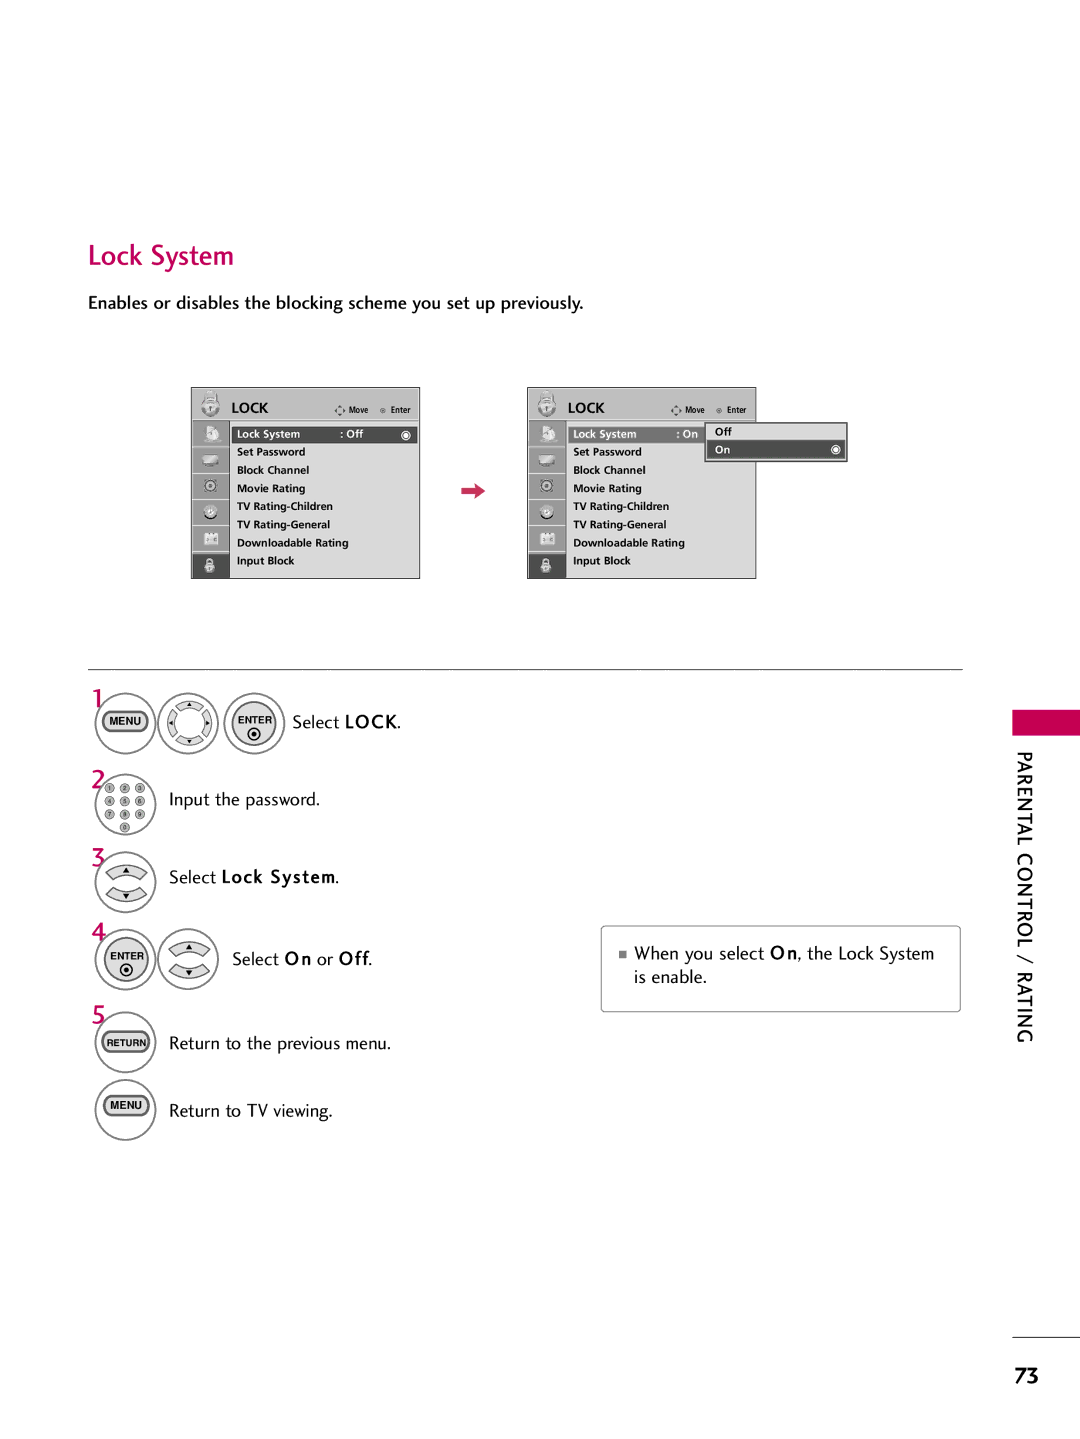 LG Electronics 223DCH Select Lock System, Is enable Return Return to the previous menu, Parental Control / Rating 